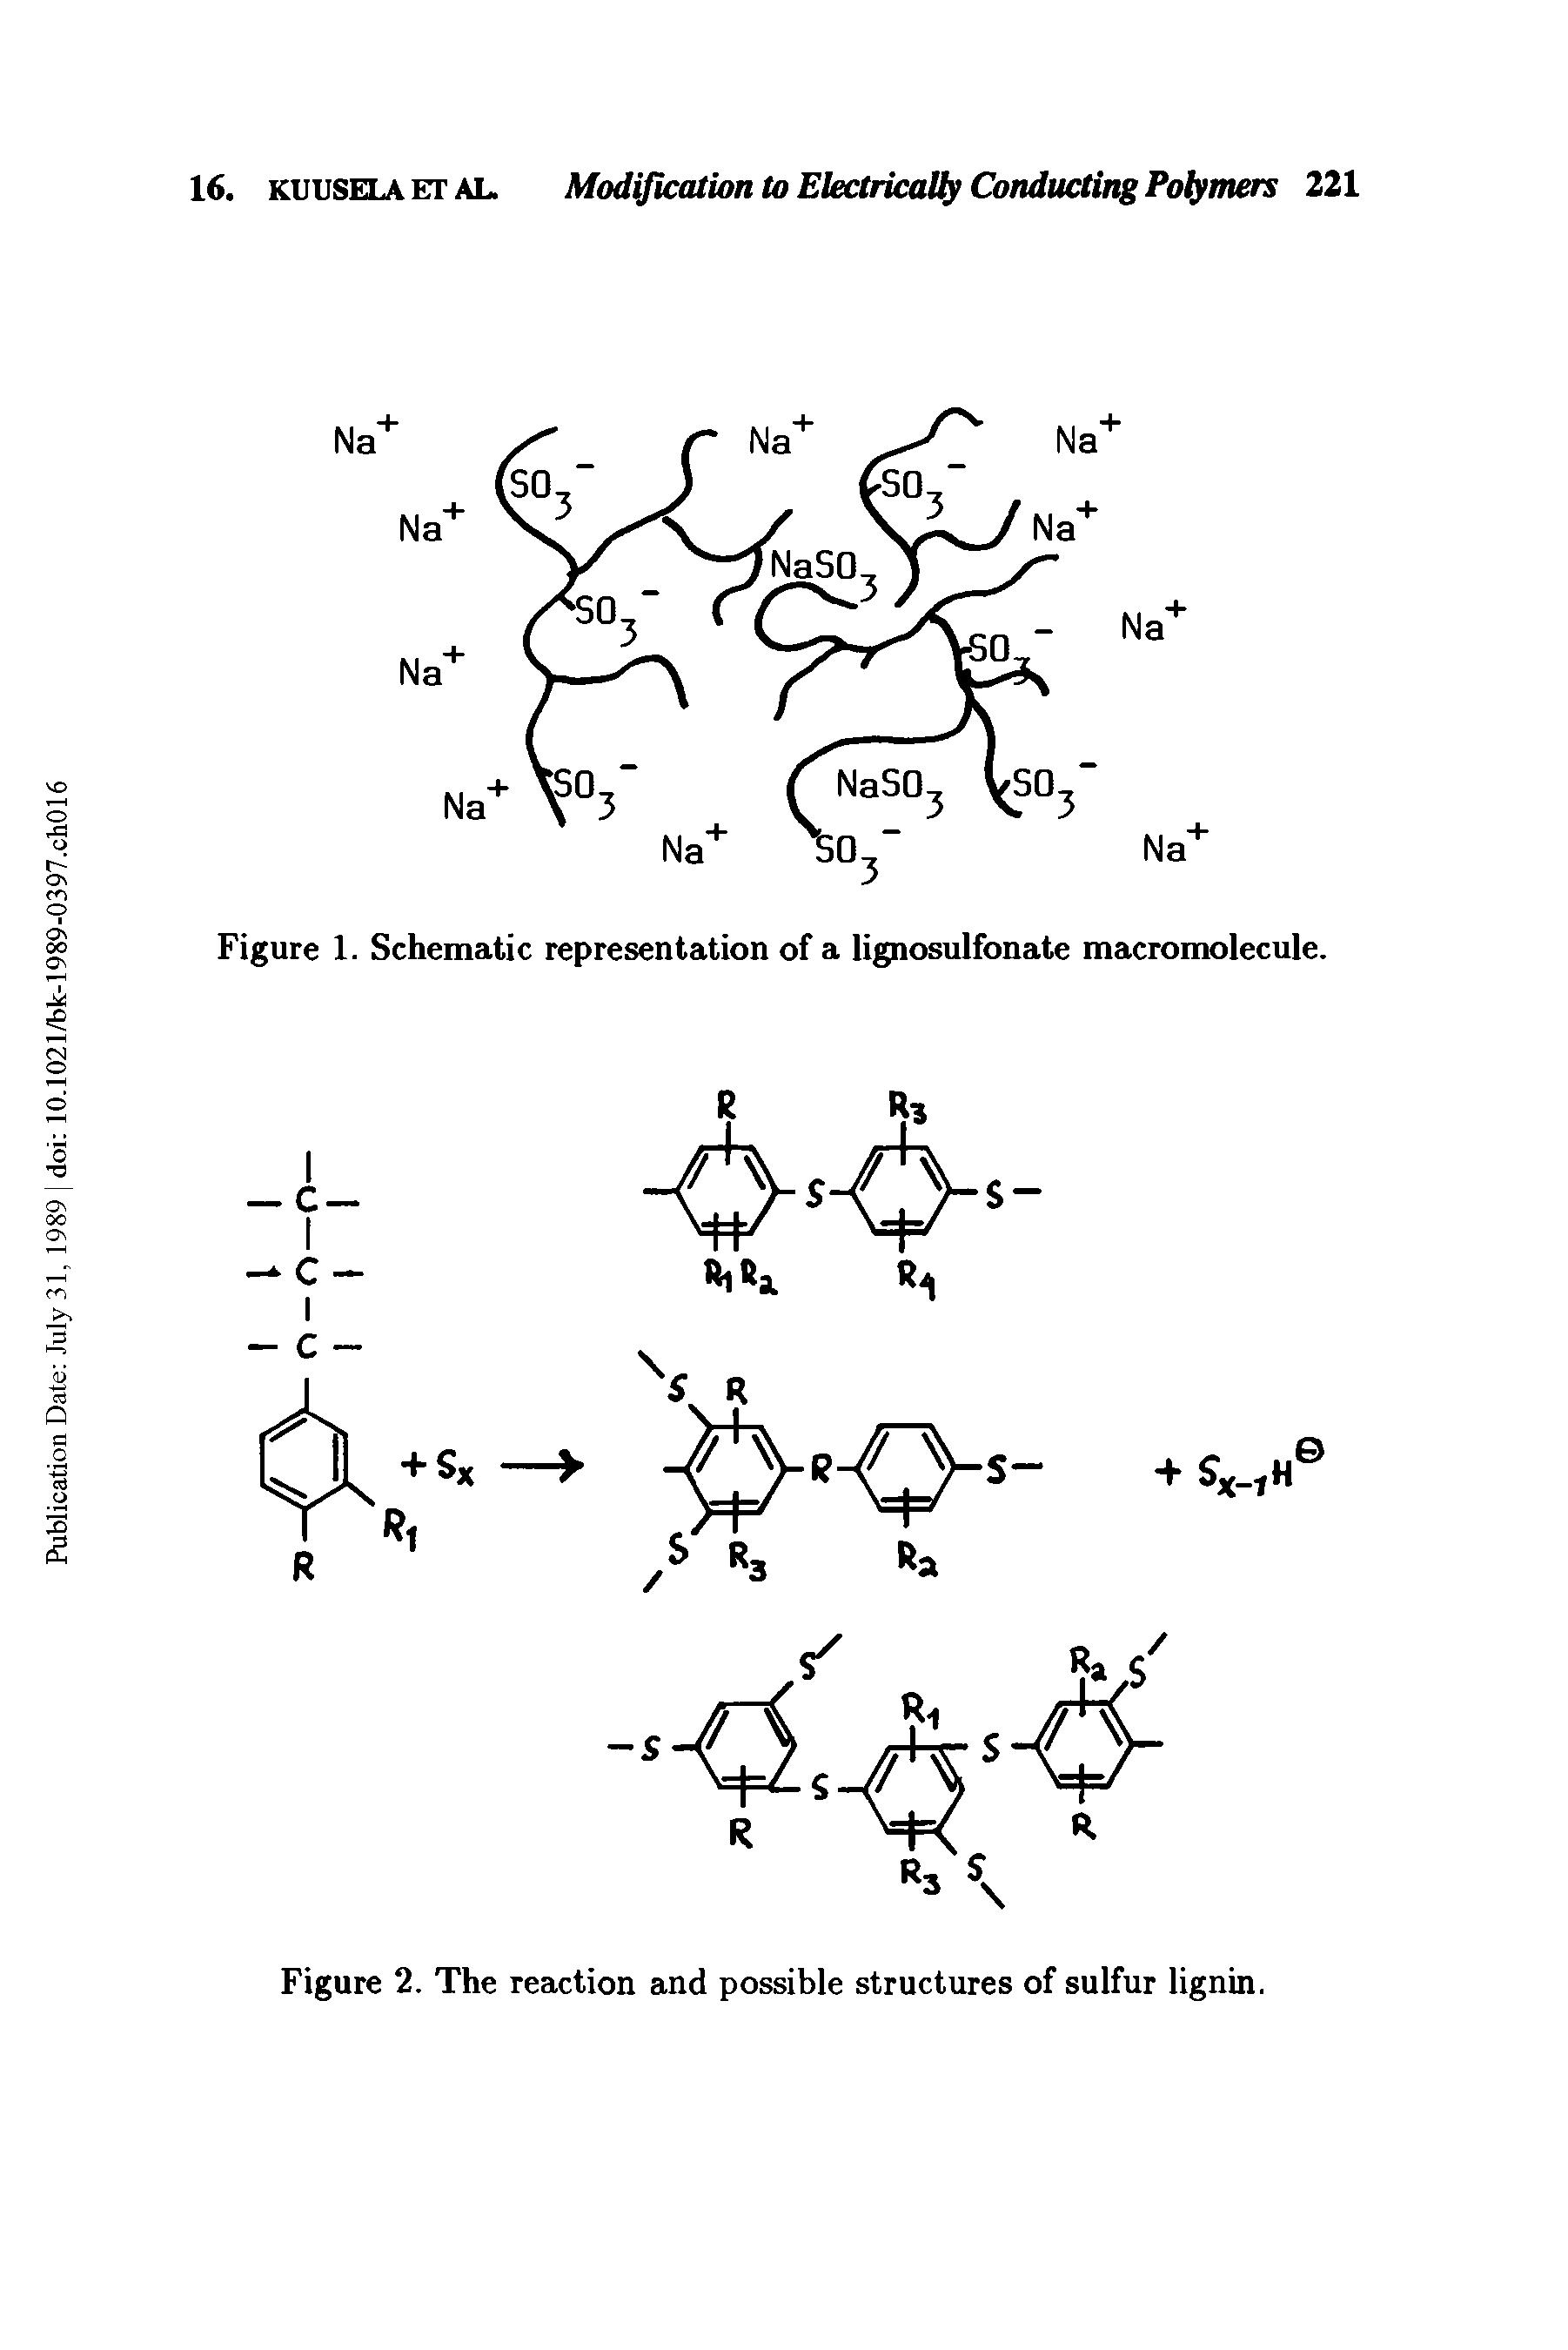 Figure 2. The reaction and possible structures of sulfur lignin.